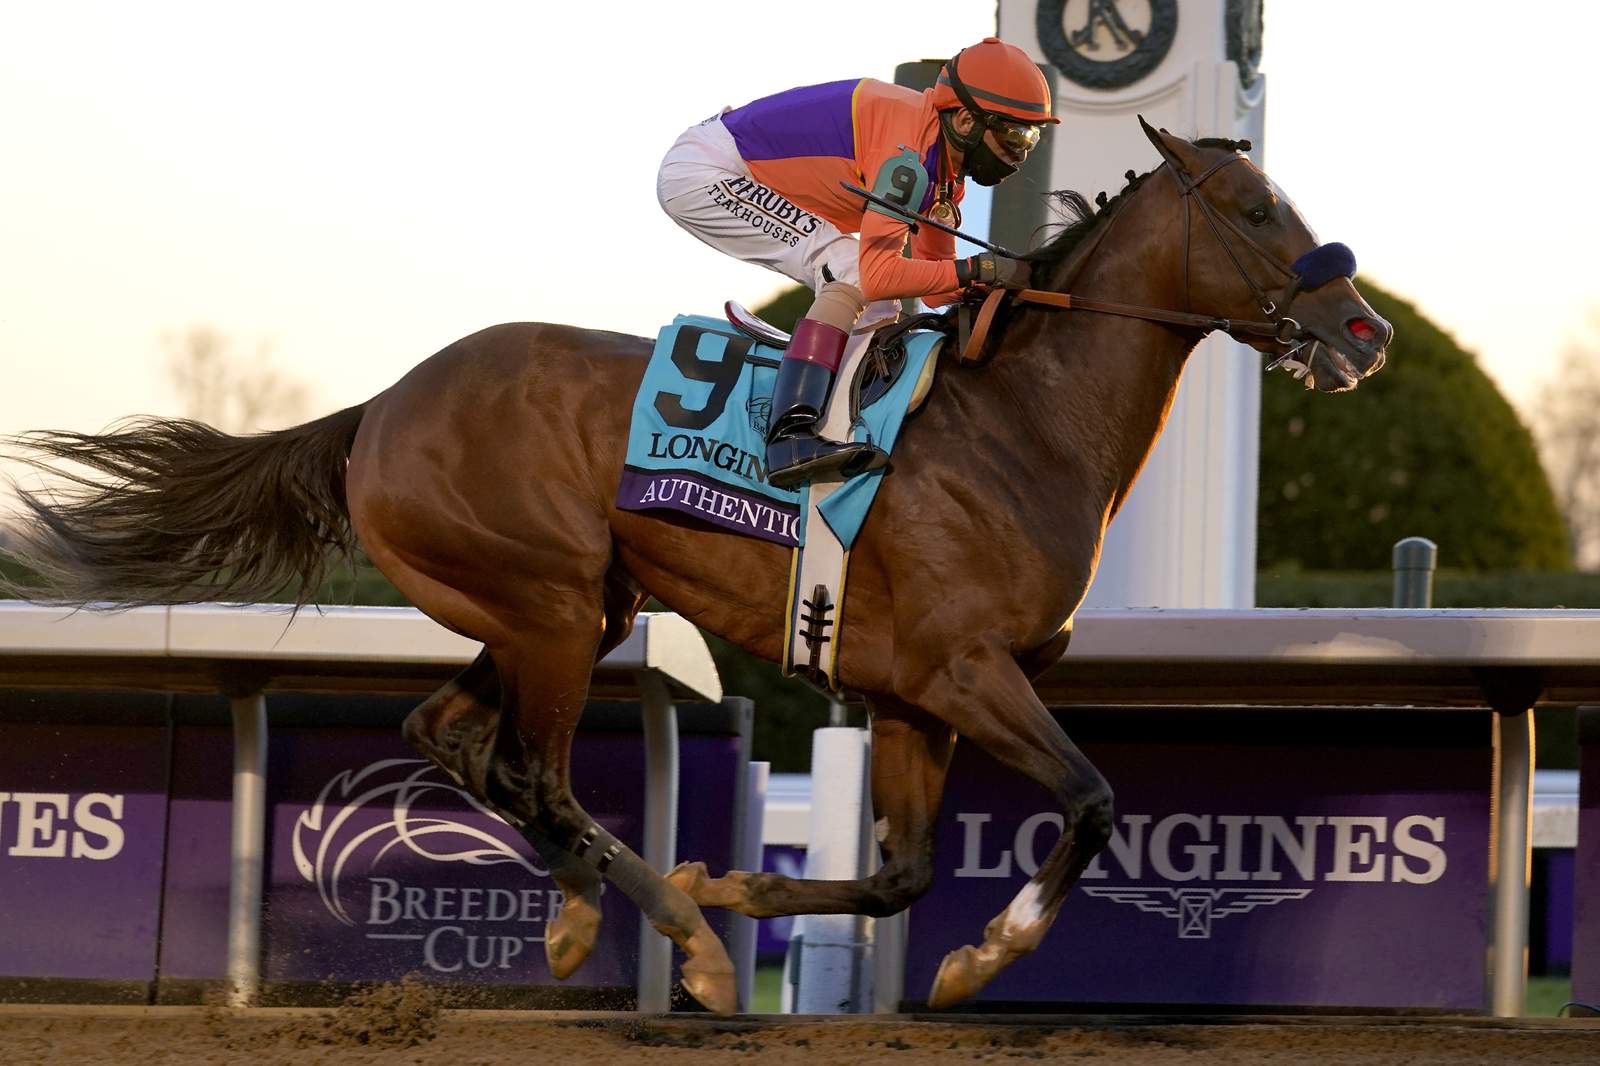 Authentic's Breeders' Cup track record updated to 1:59.60